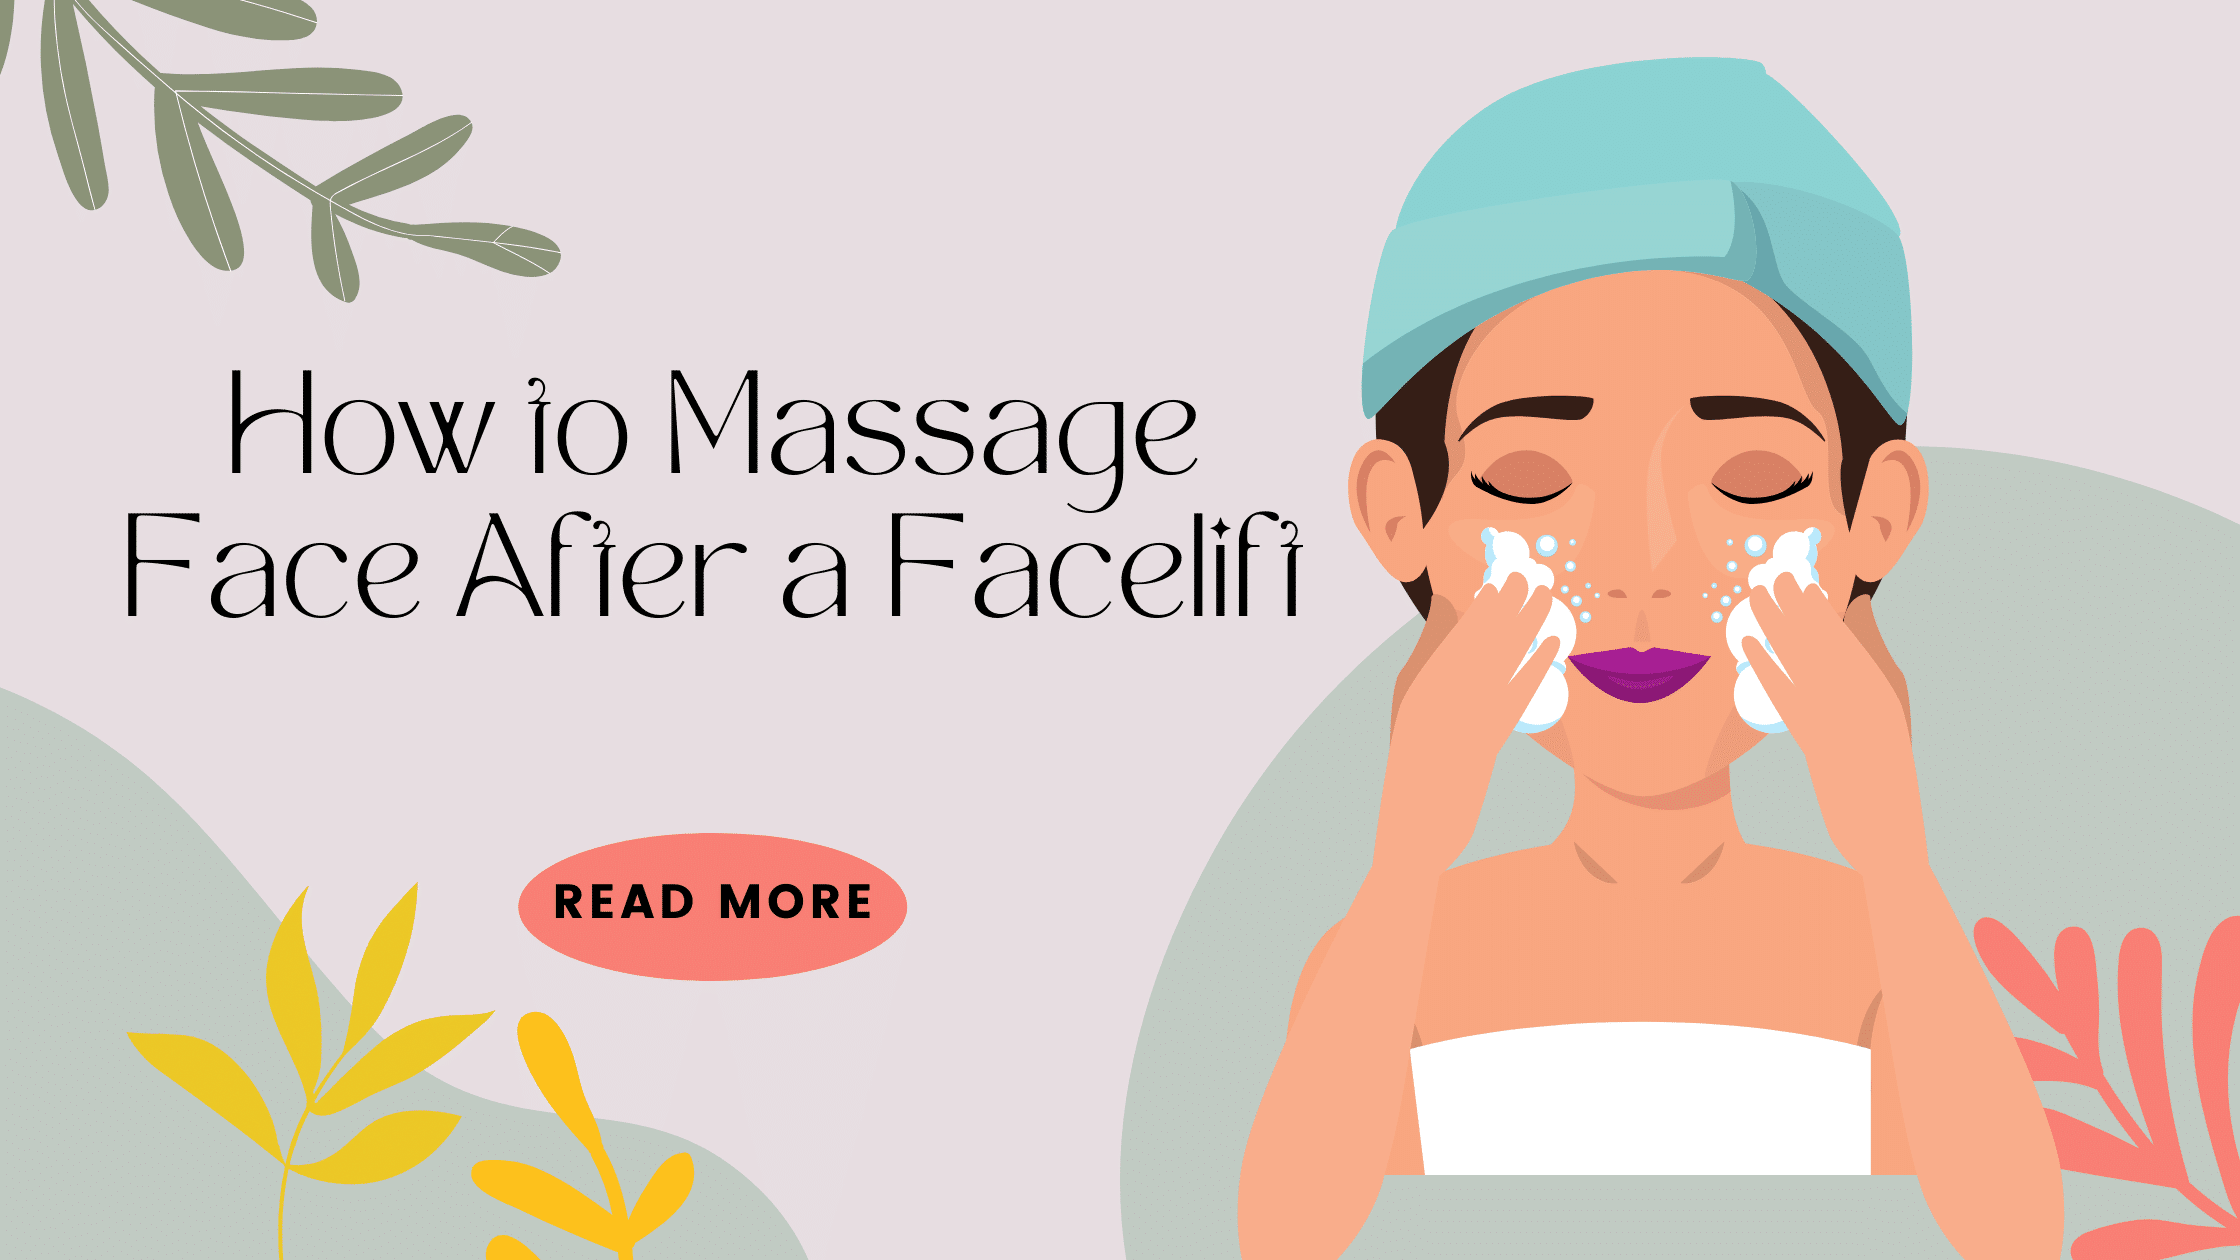 how to massage face after facelift